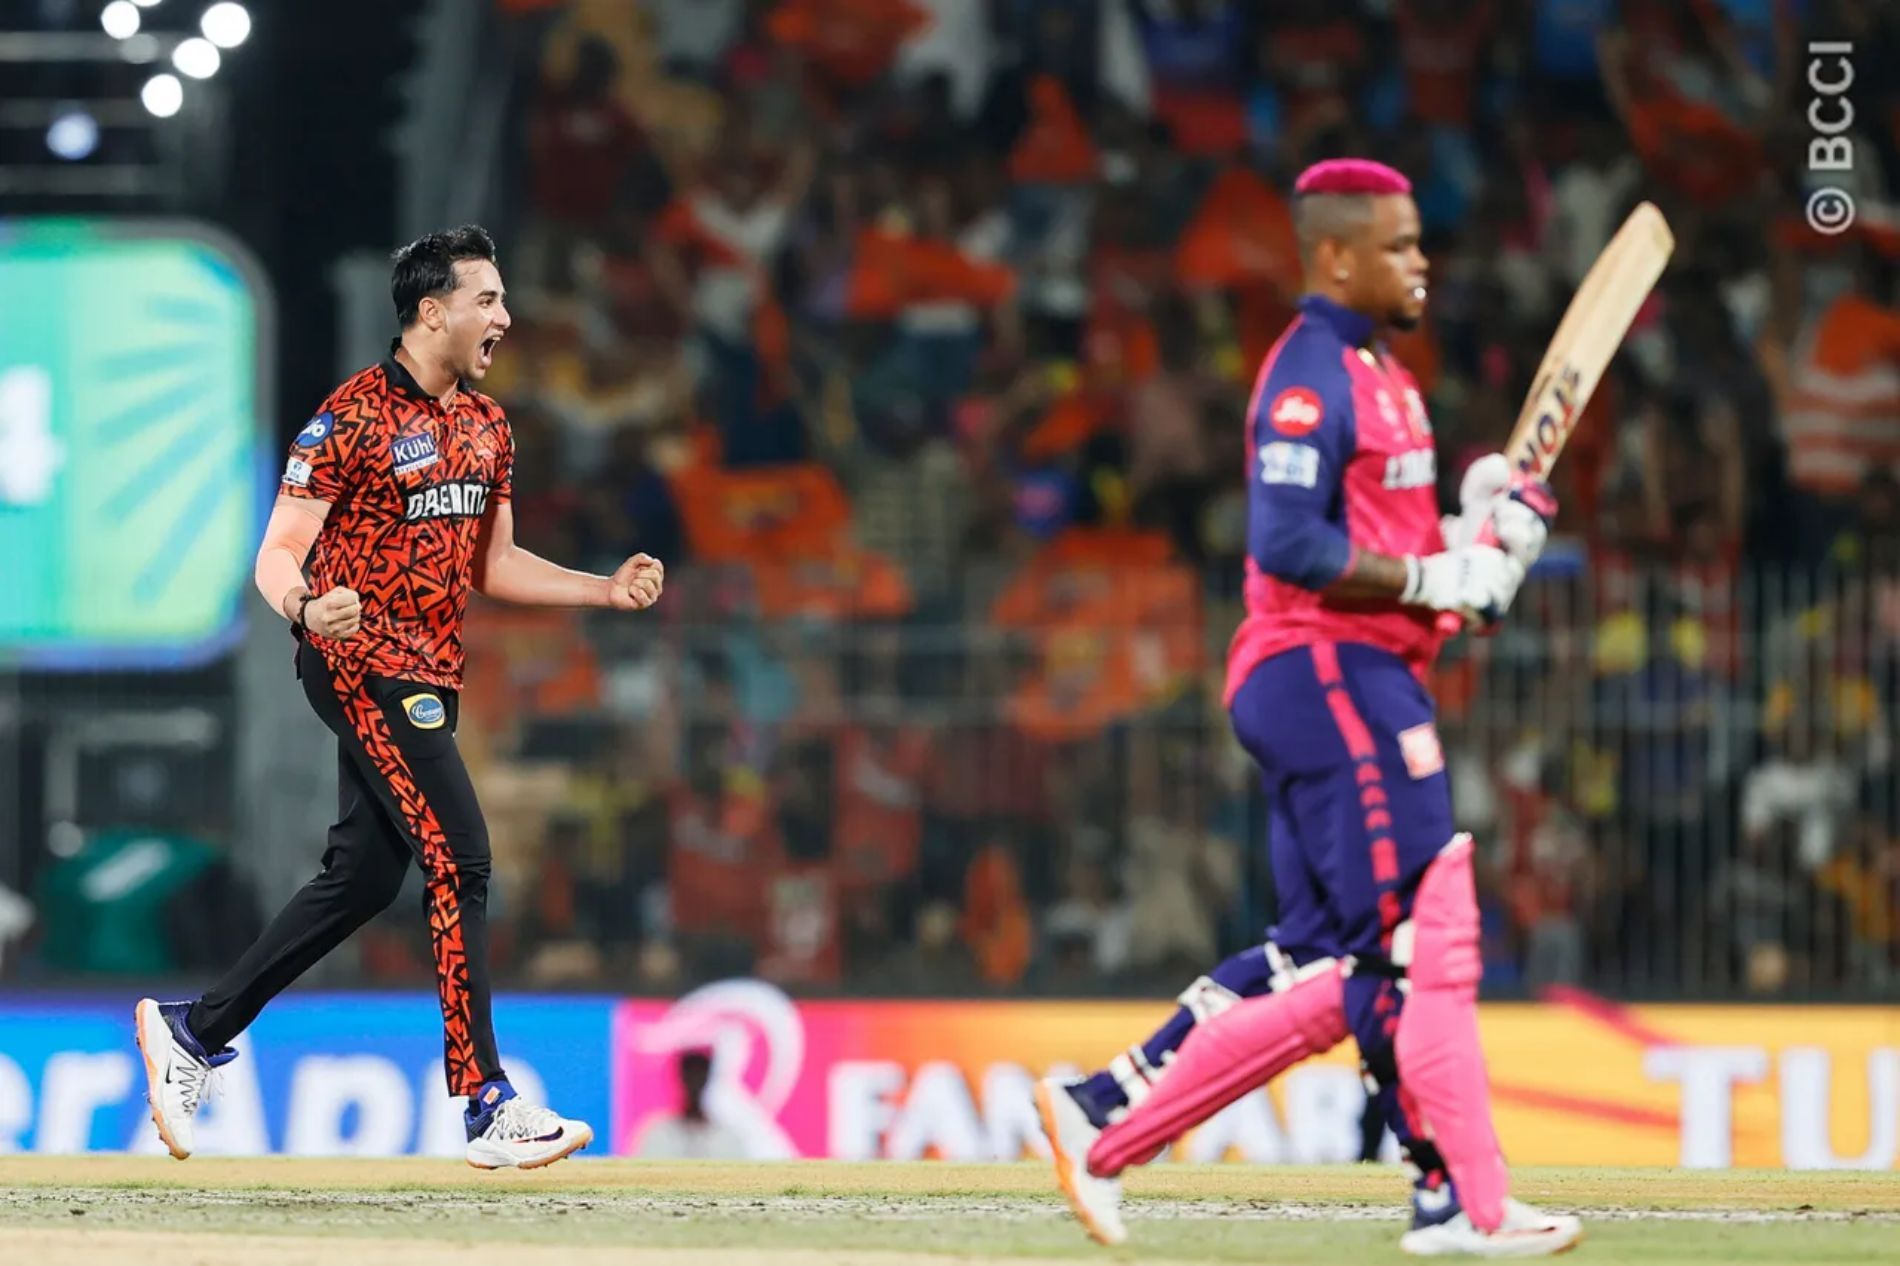 Abhishek Sharma was a surprise package with the ball. (Image Credit: BCCI/ iplt20.com)